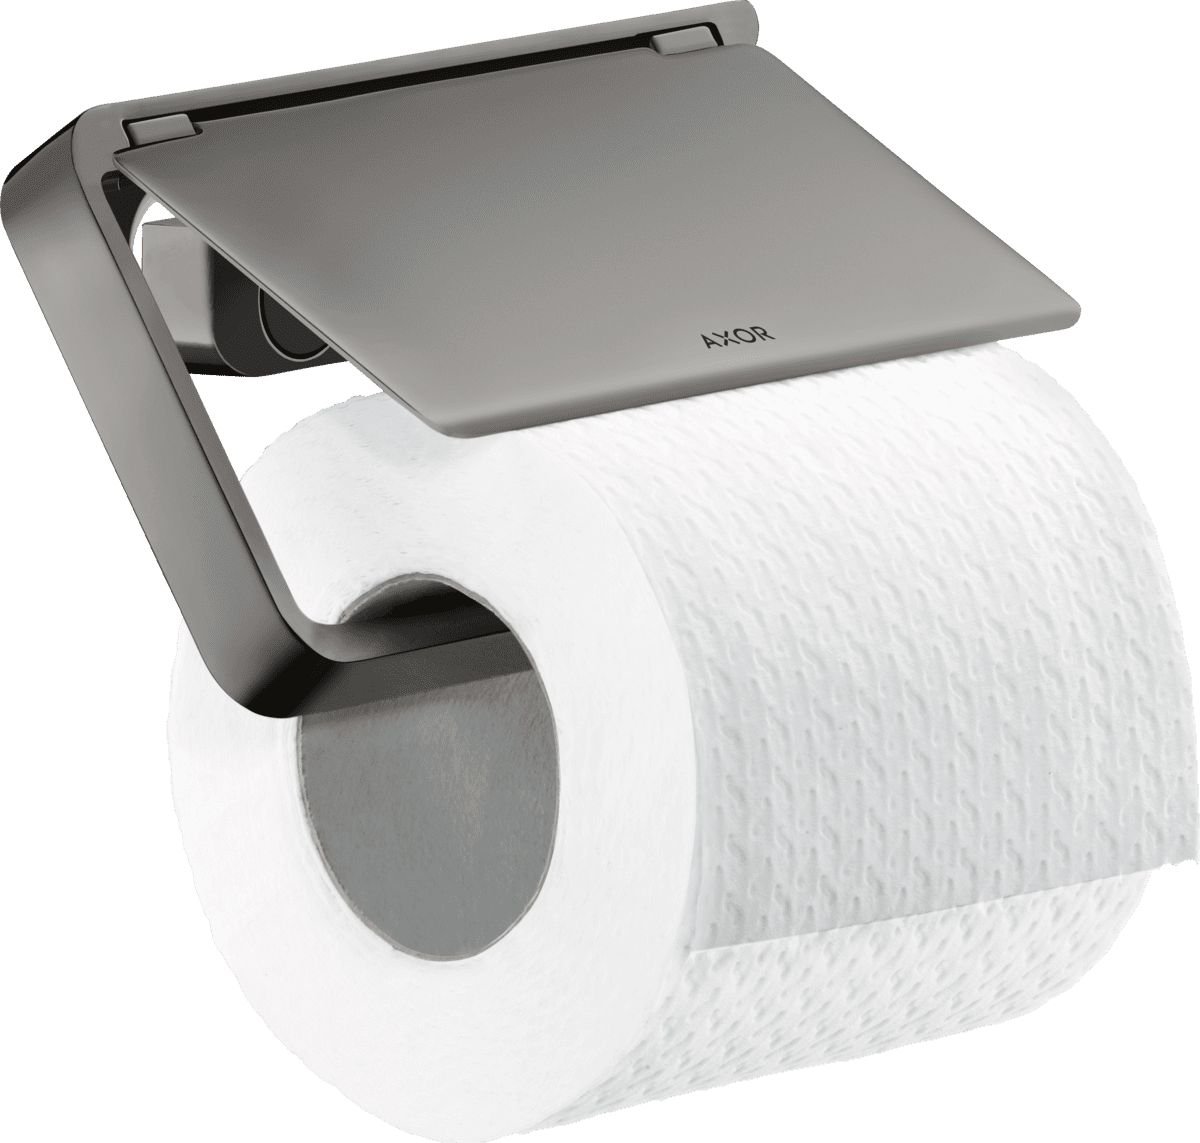 Picture of HANSGROHE AXOR Universal Softsquare Toilet paper holder with cover #42836330 - Polished Black Chrome